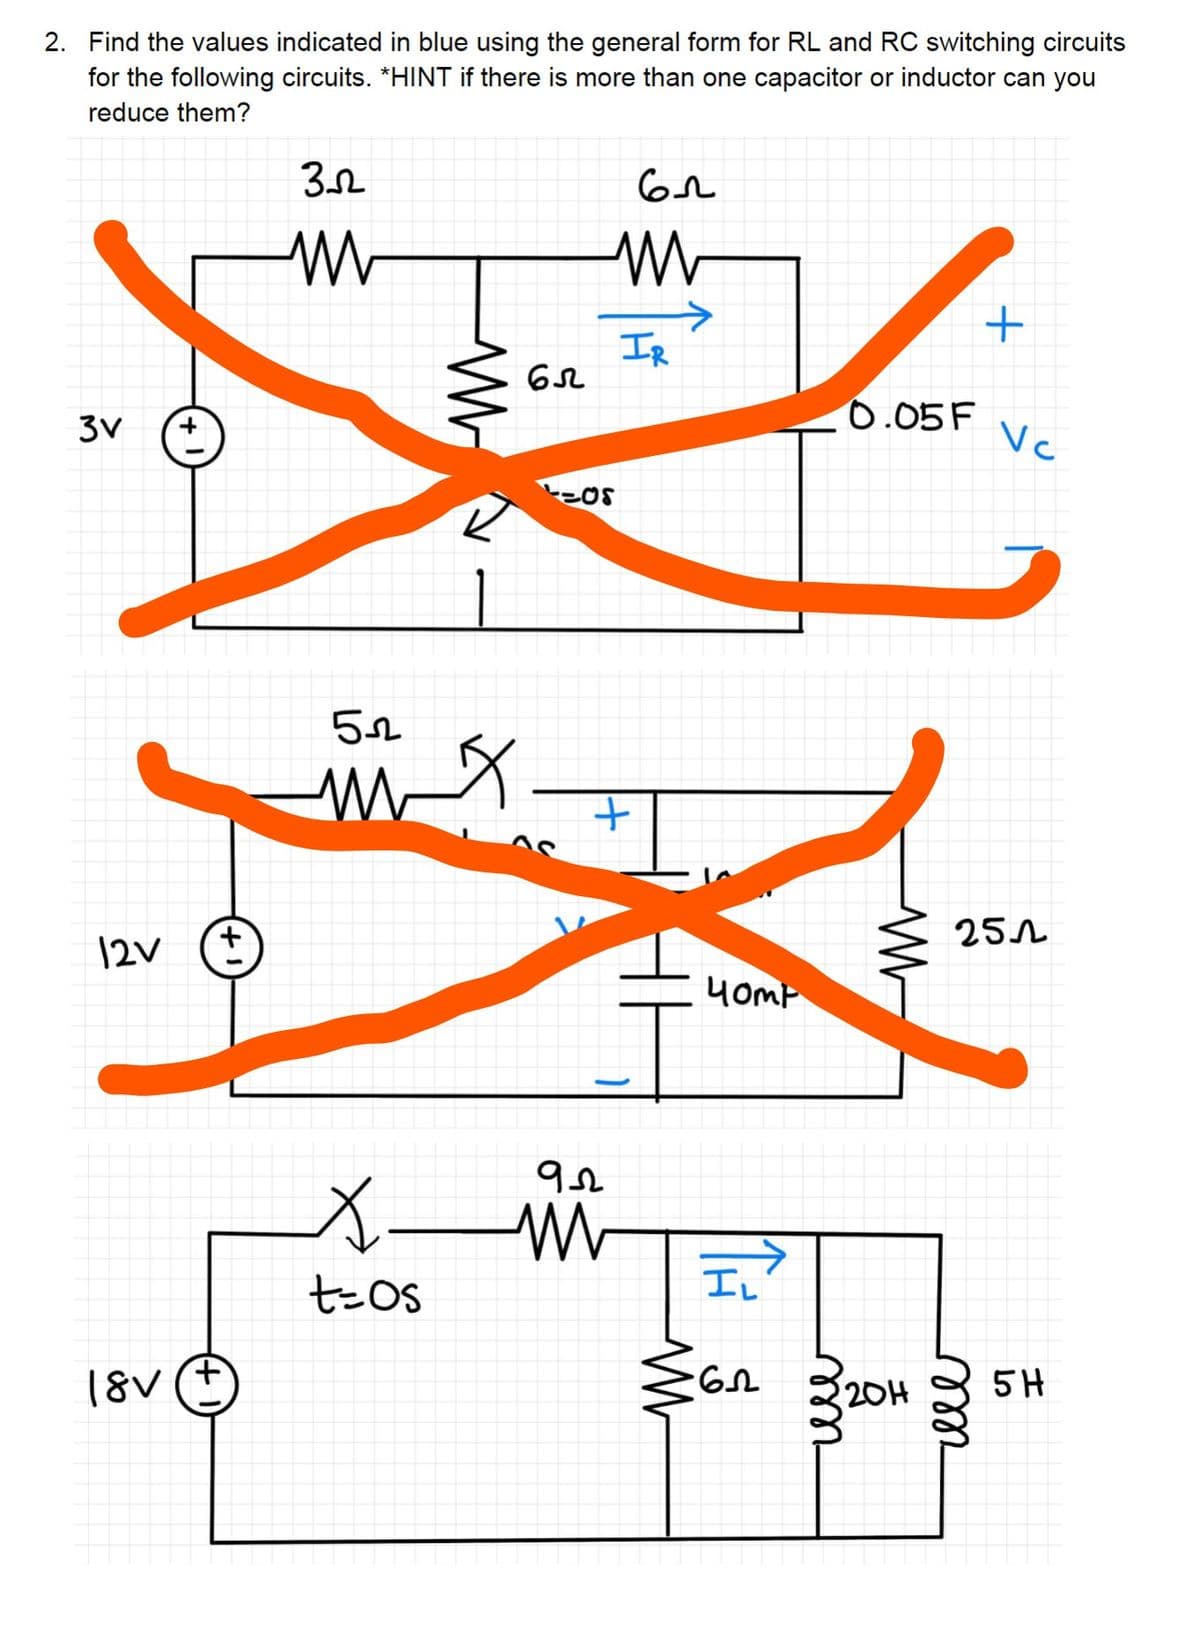 2. Find the values indicated in blue using the general form for RL and RC switching circuits
for the following circuits. *HINT if there is more than one capacitor or inductor can you
reduce them?
вл
3V
12V
+
+1
18V (+
352
52
X
t=os
W
65
L=0S
922
M
IR
+
W
40mp
IL
-65
m
0.05 F
W
20H
+
m
Vc
251
5H